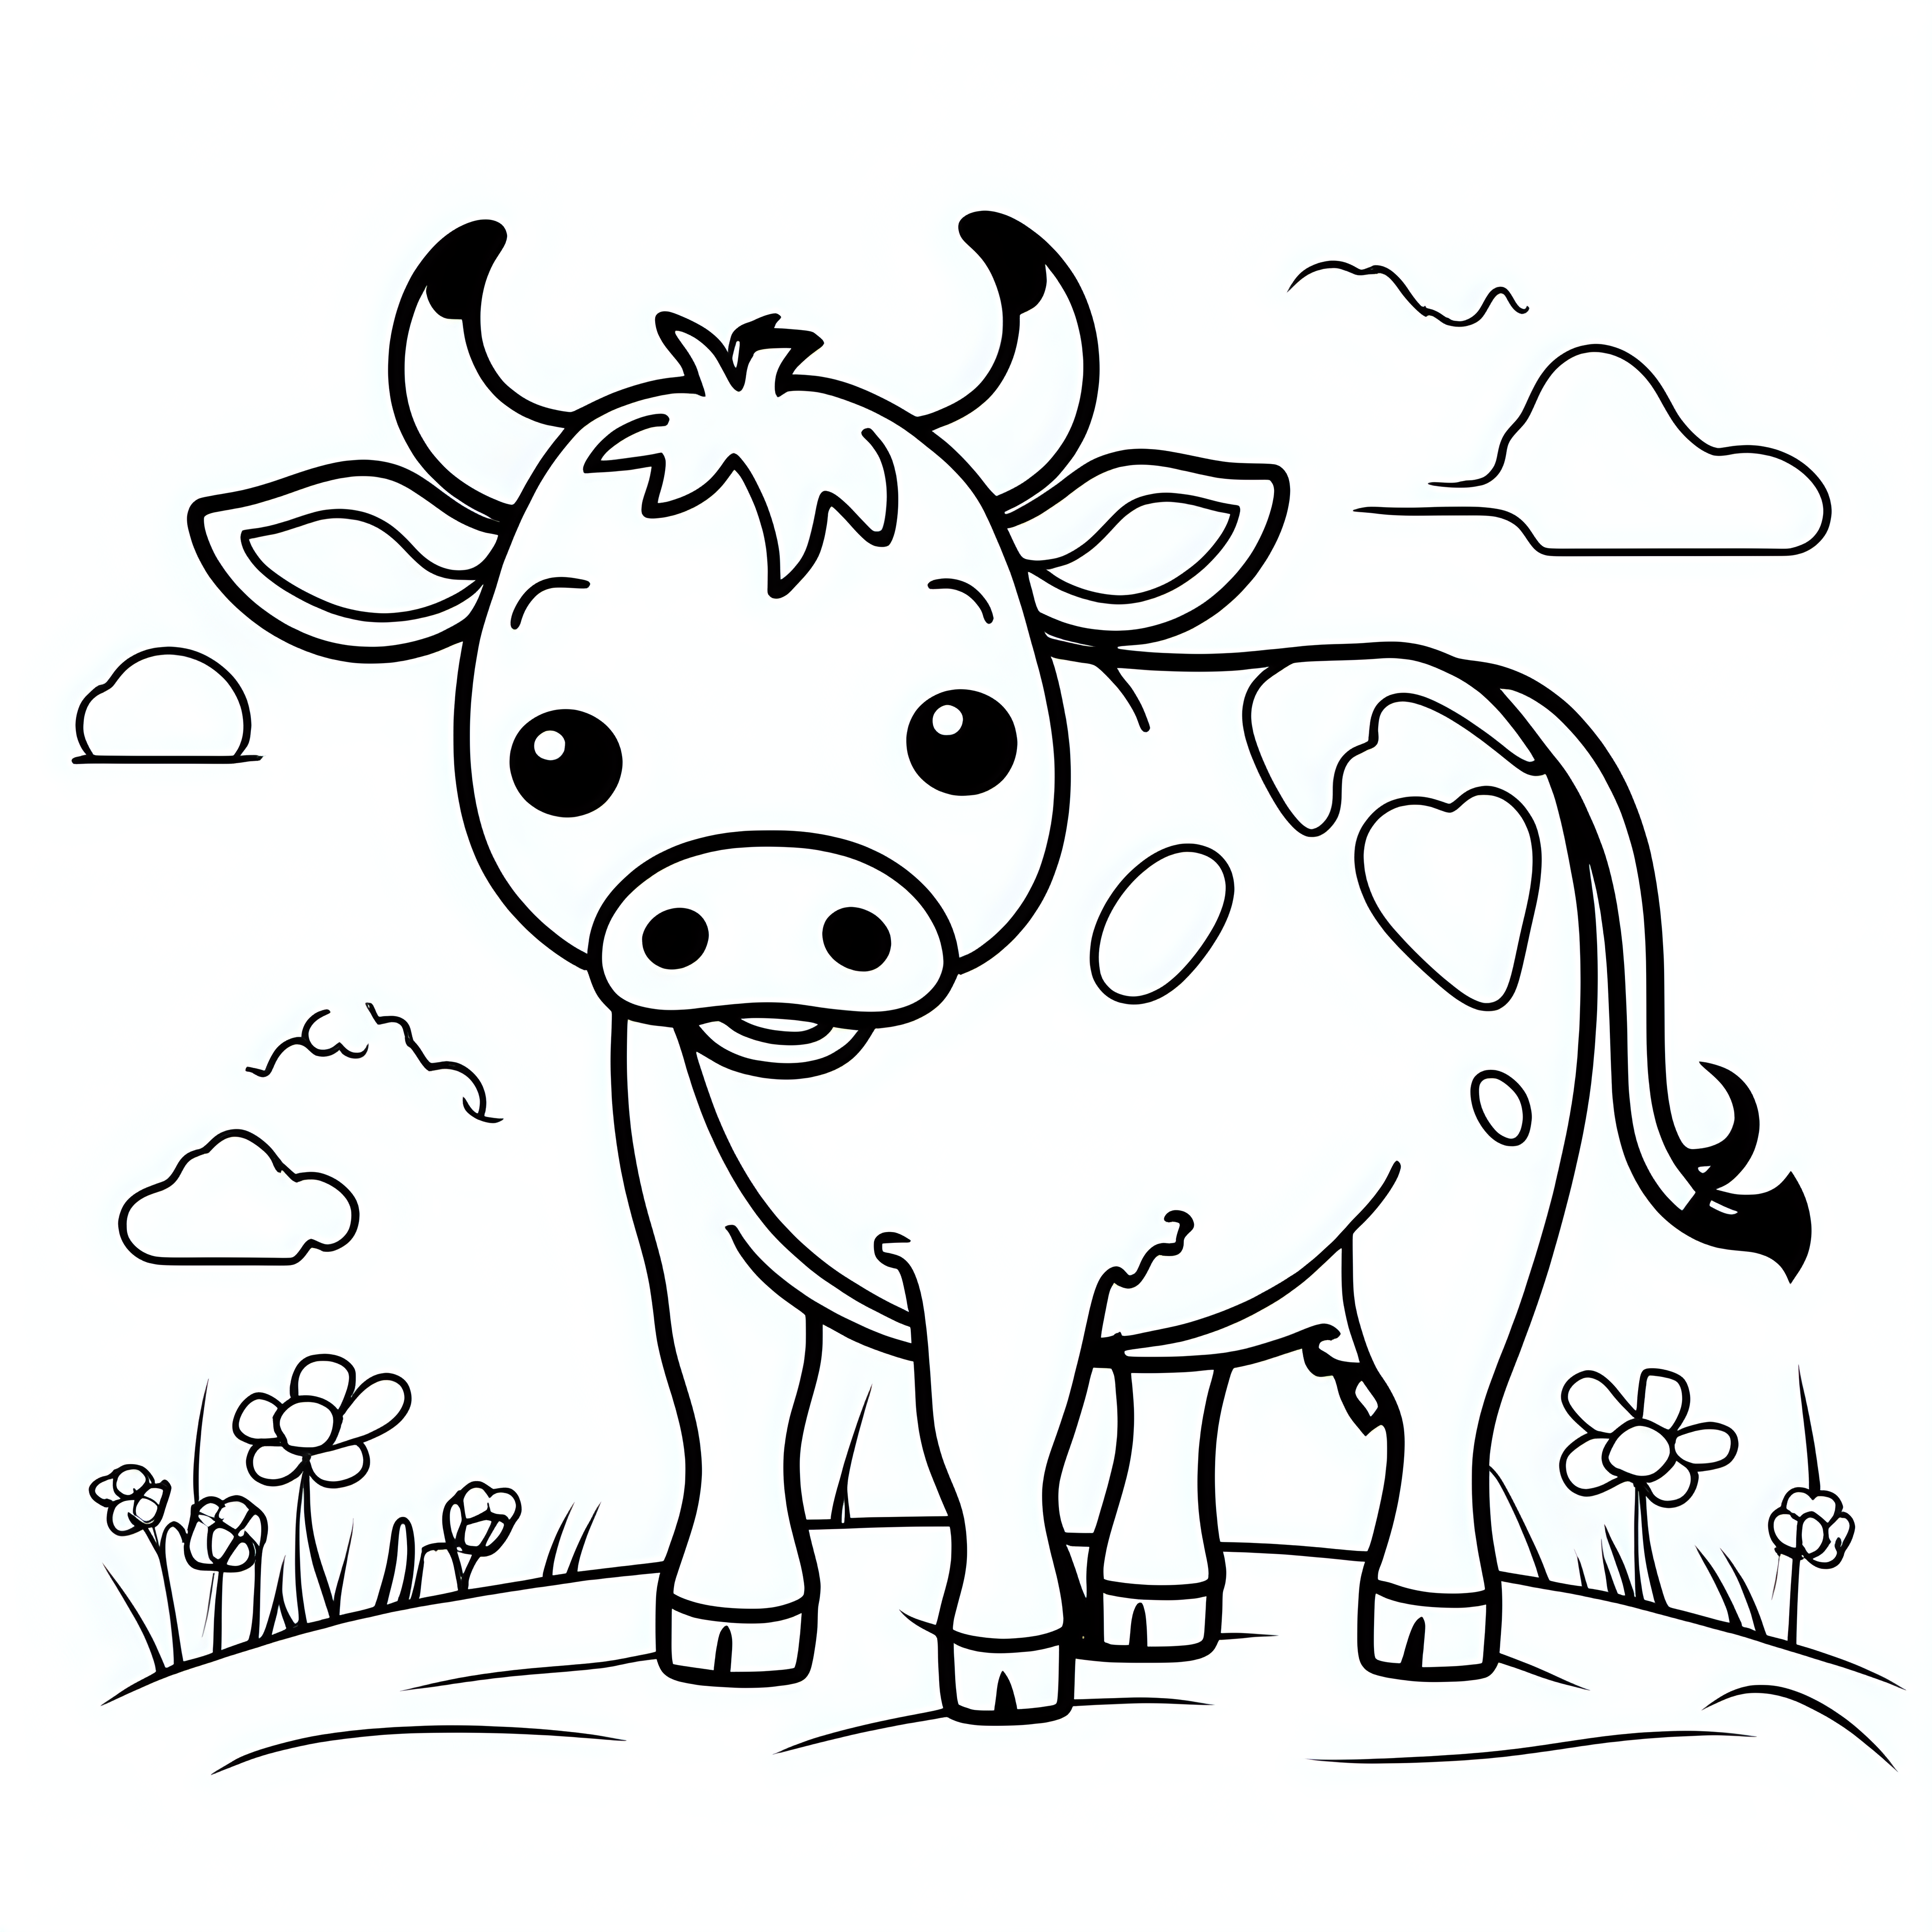 draw a cute cow with only the outline in black for a coloring book for kids